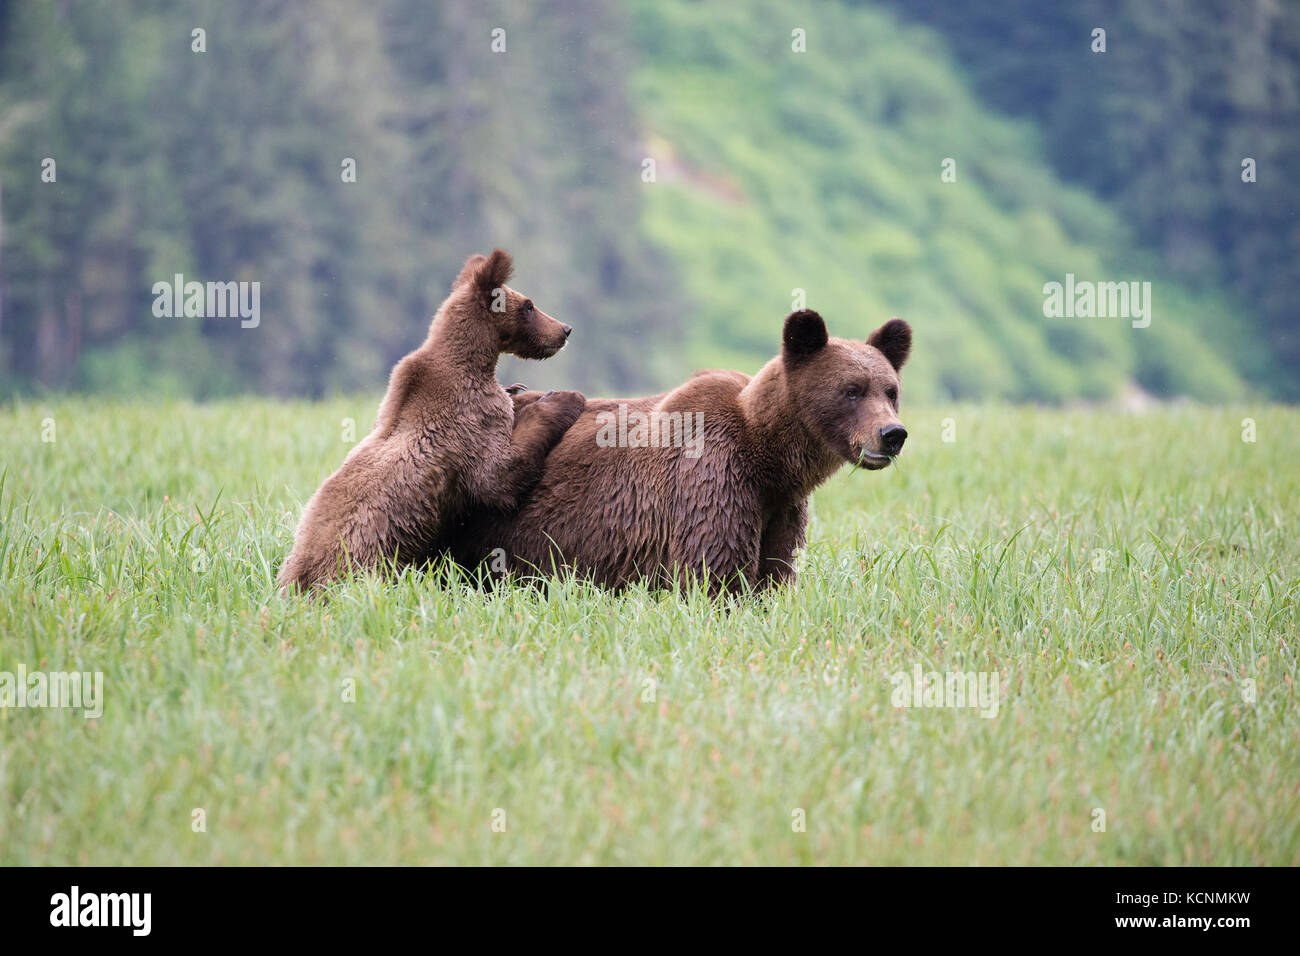 Grizzly bear (Ursus arctos horriblis), yearling cub with paws on female's back as female eats Lyngbye's sedge (Carex lyngbyei), Khutzeymateen Grizzly Bear Sanctuary, British Columbia, Canada. Stock Photo